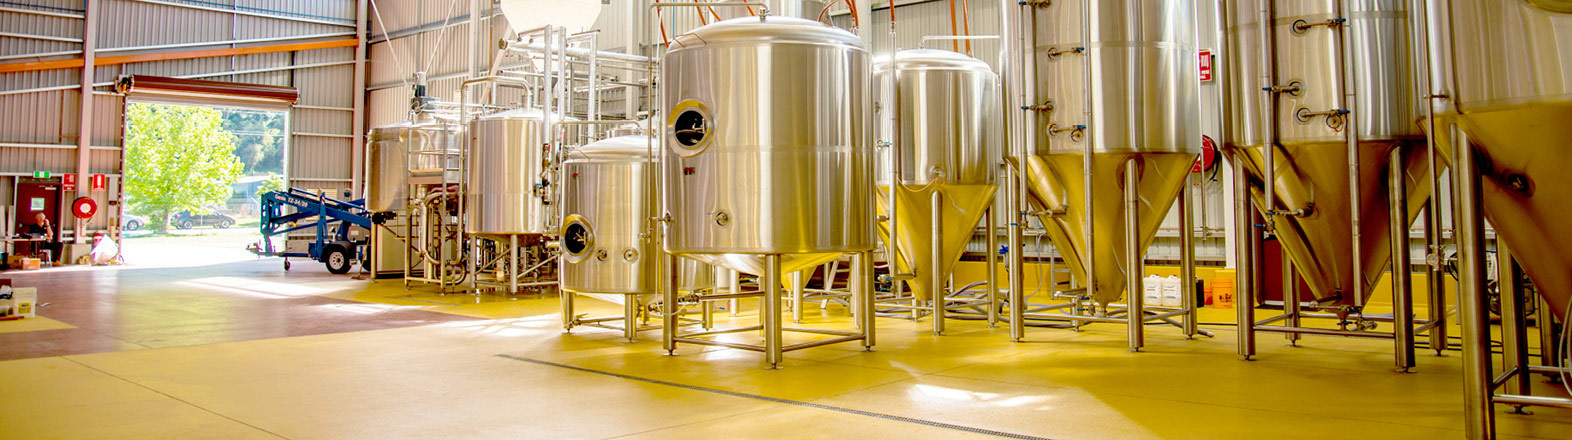 Flooring Design for
Brewery Production Areas